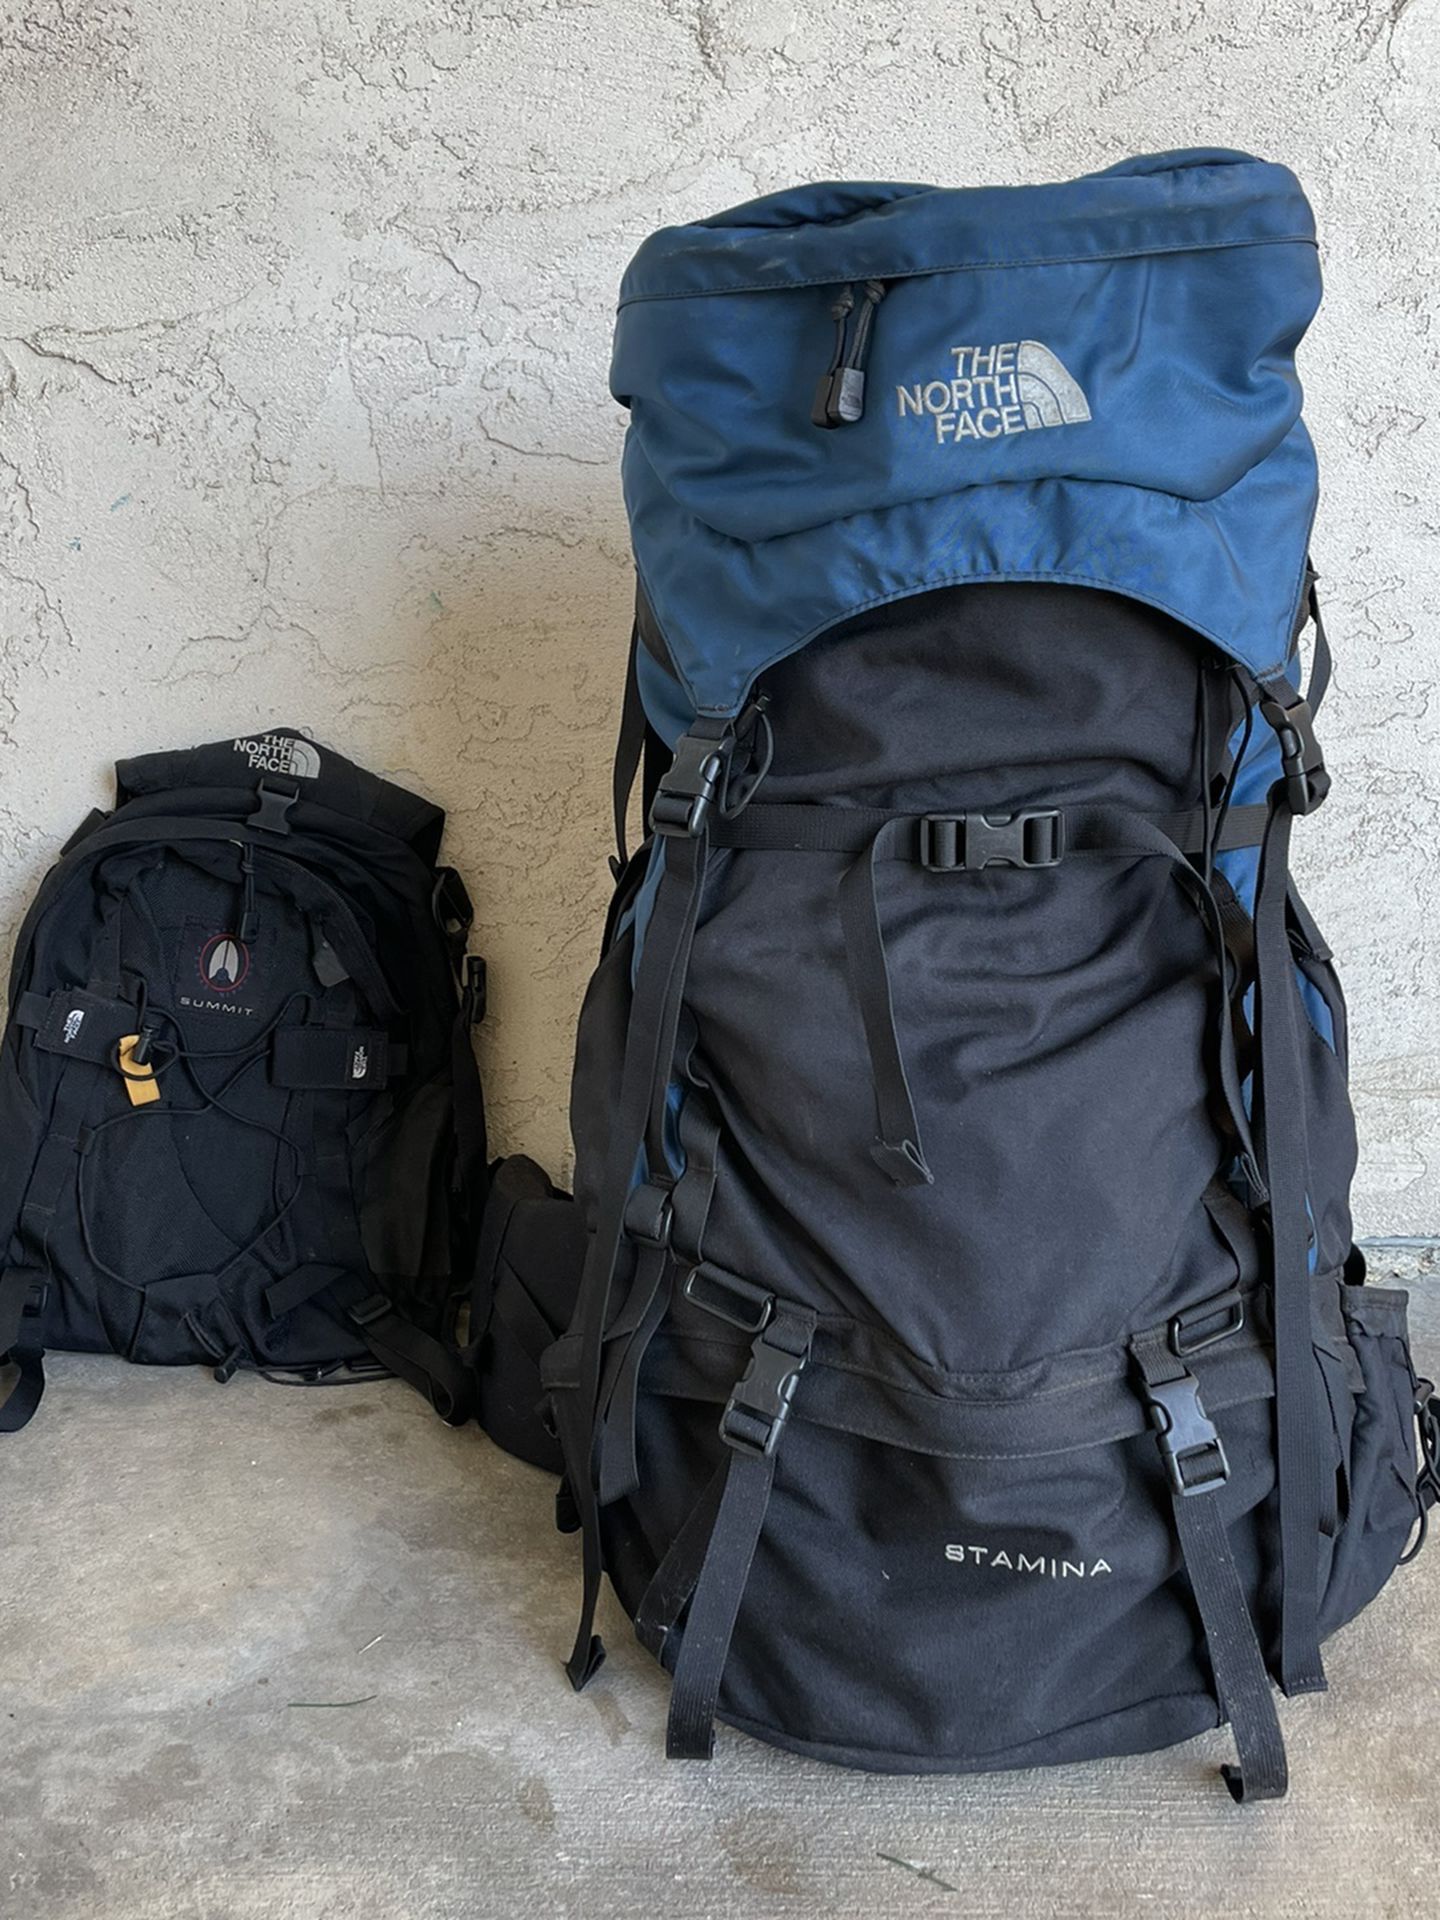 The North Face Stamina 65 Backpack